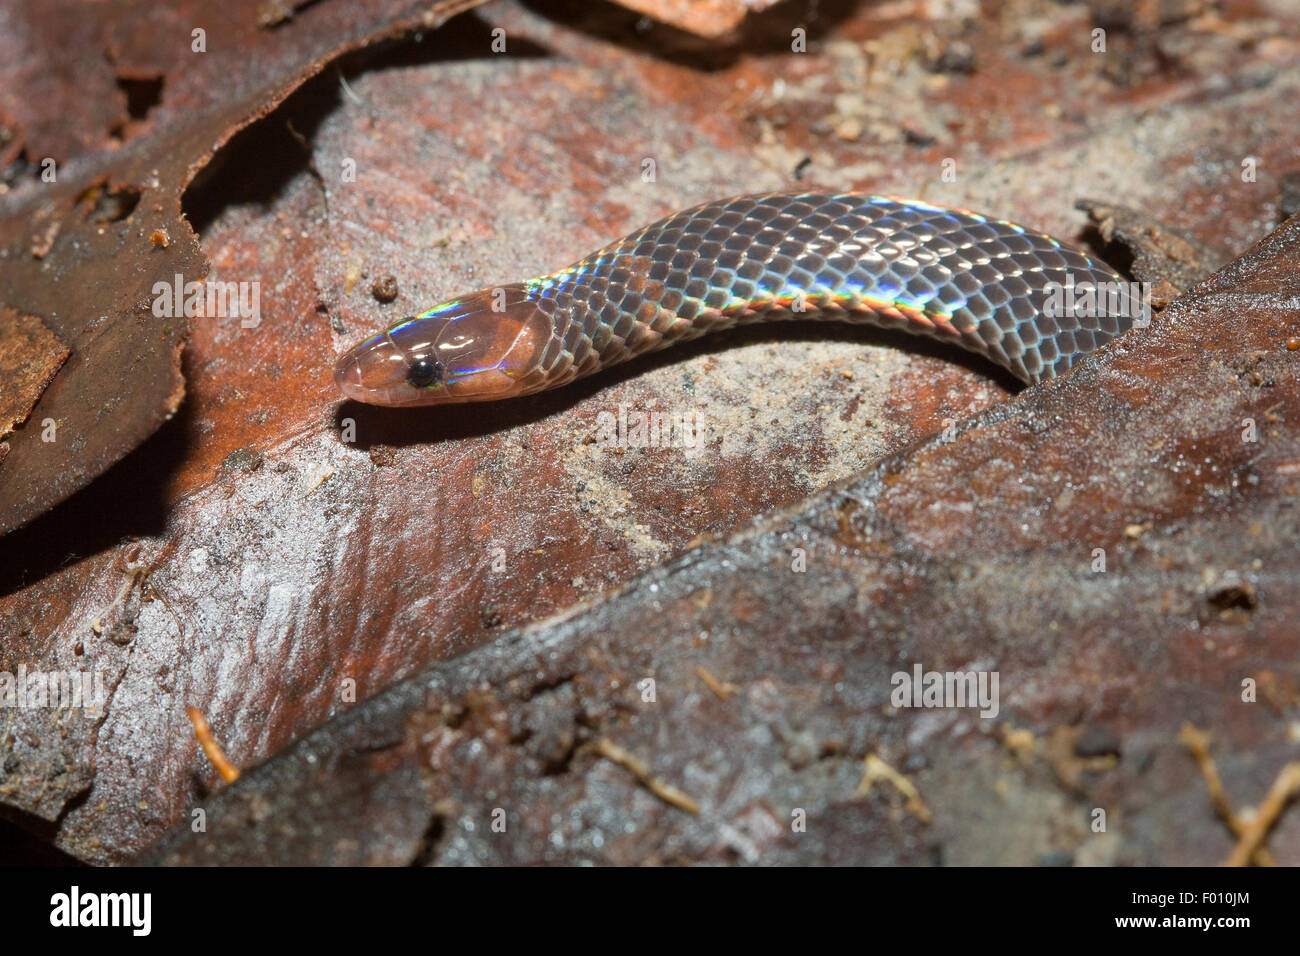 Red-necked reed snake (Pseudorabdion collaris) in leaf litter. Stock Photo